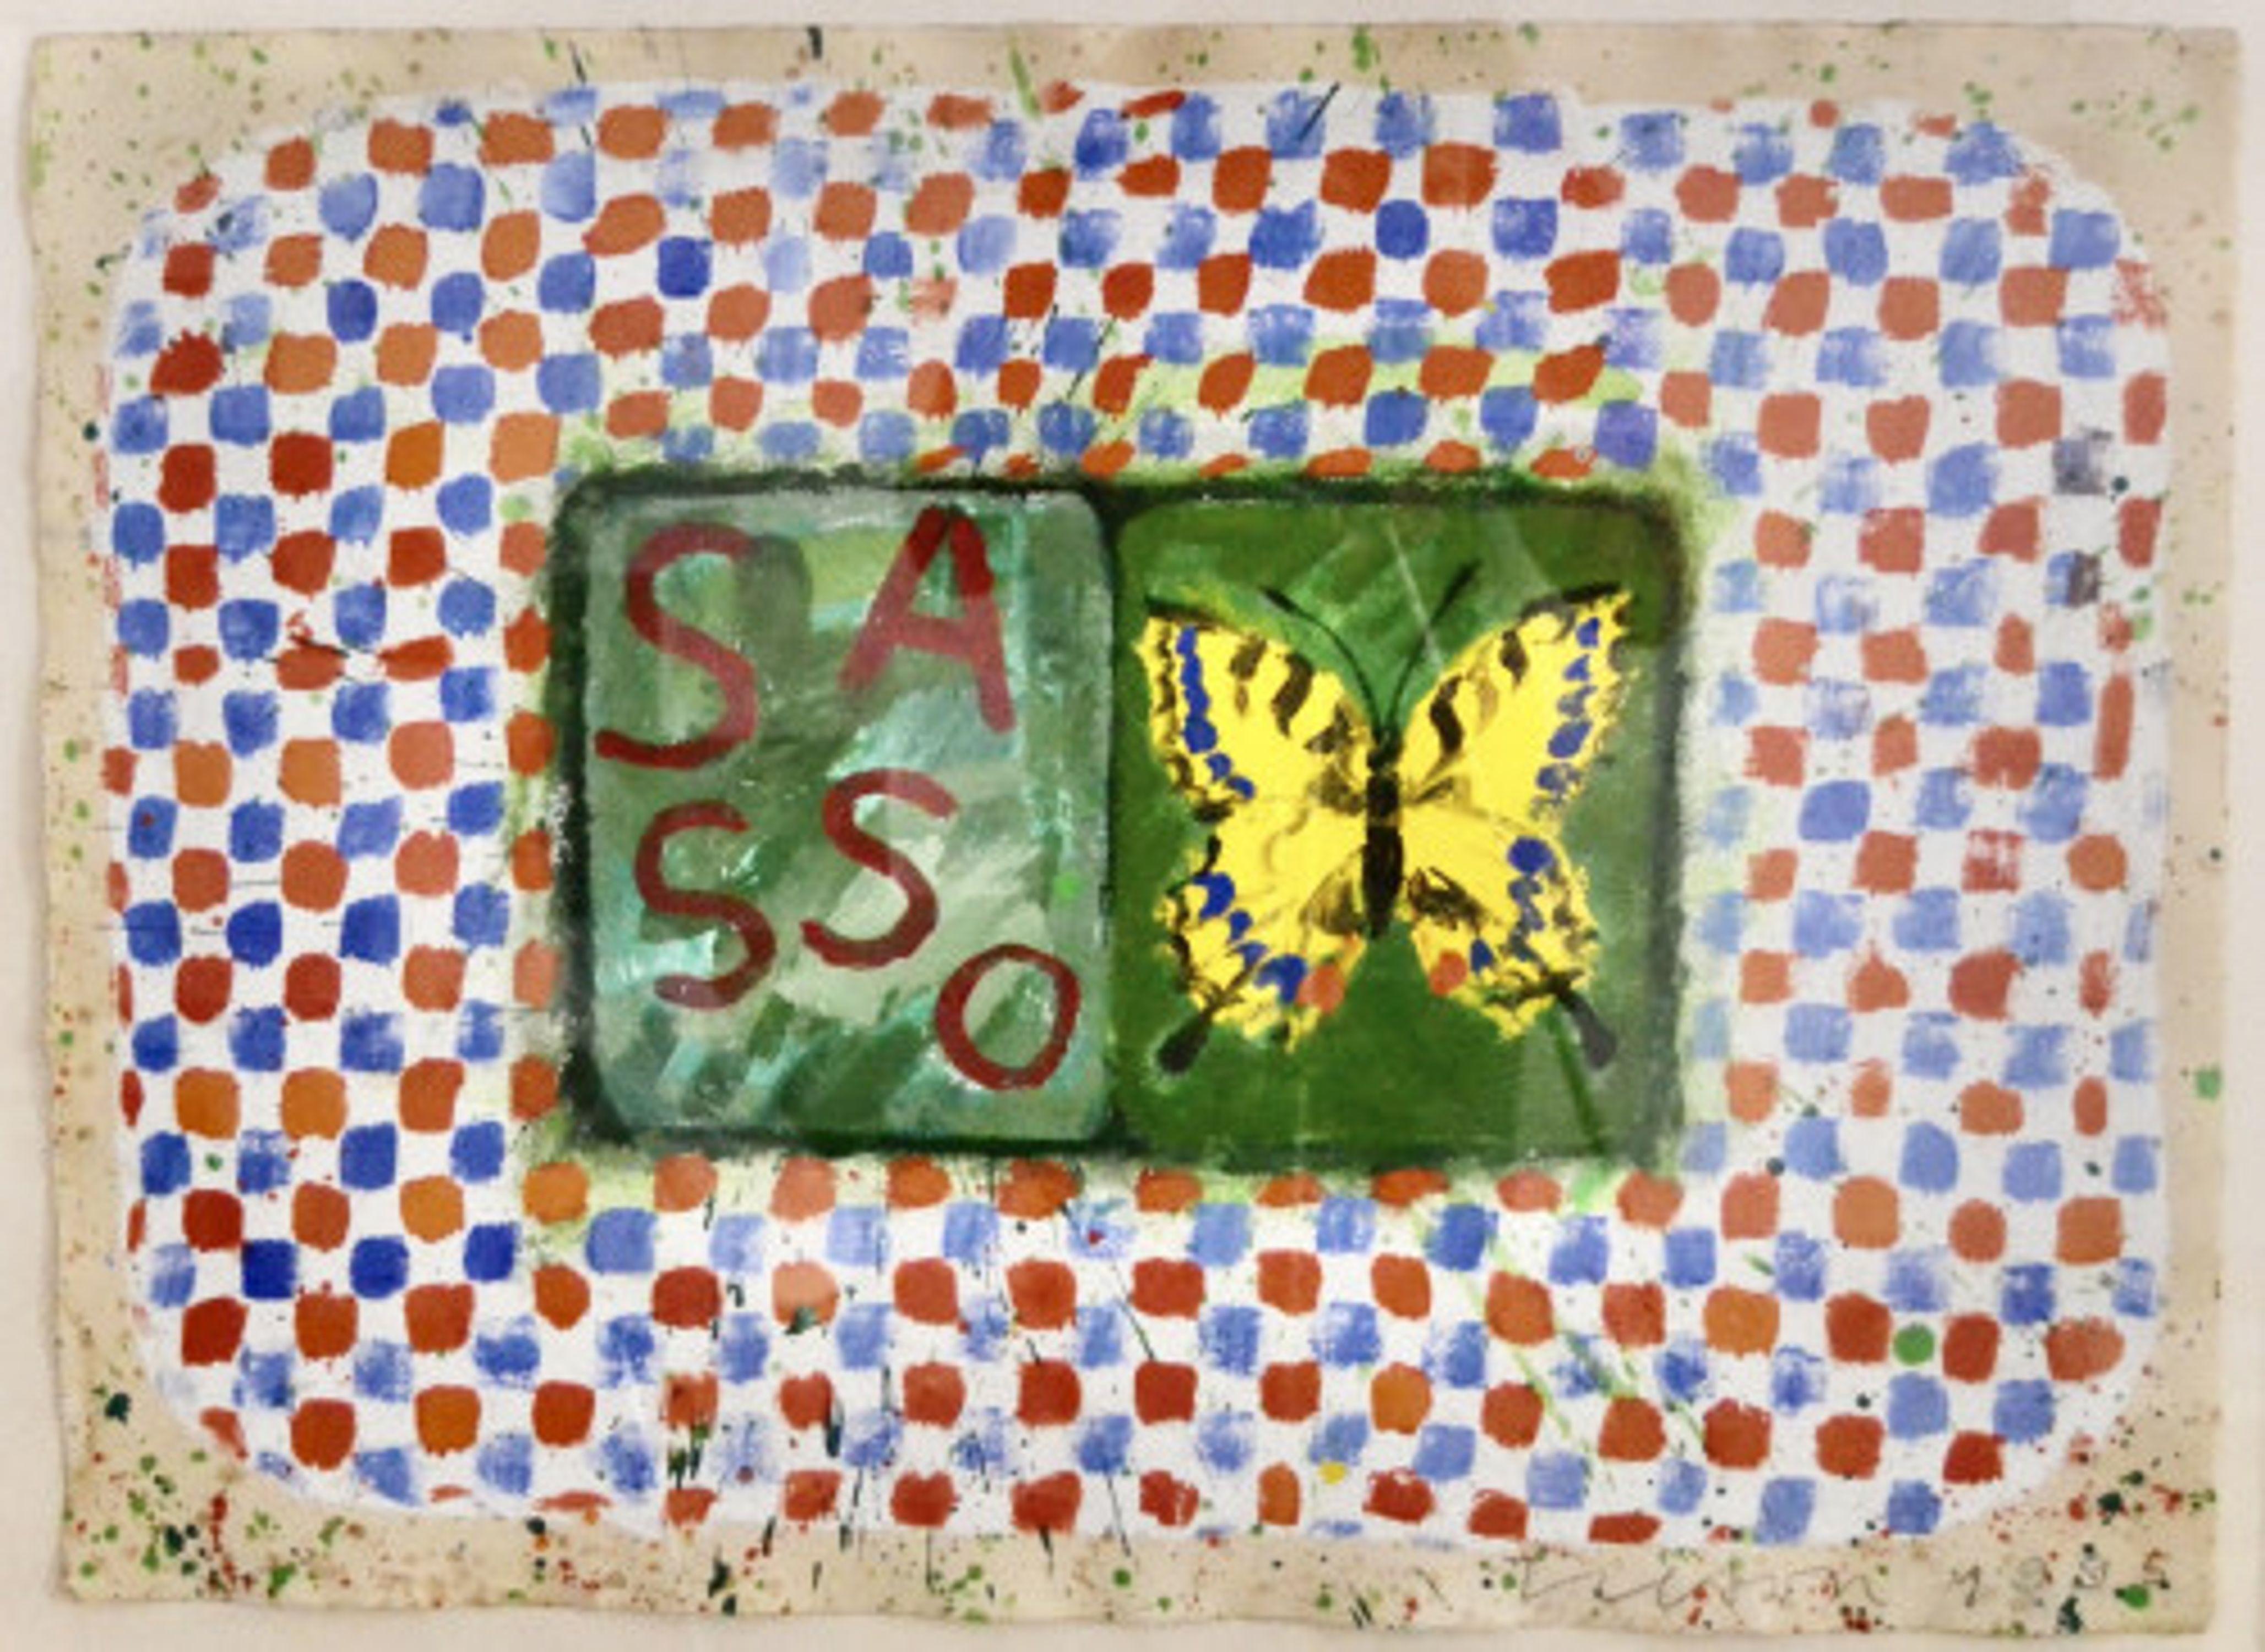 Conjunctions Swallowtail, Sasso - Painting by Joe Tilson